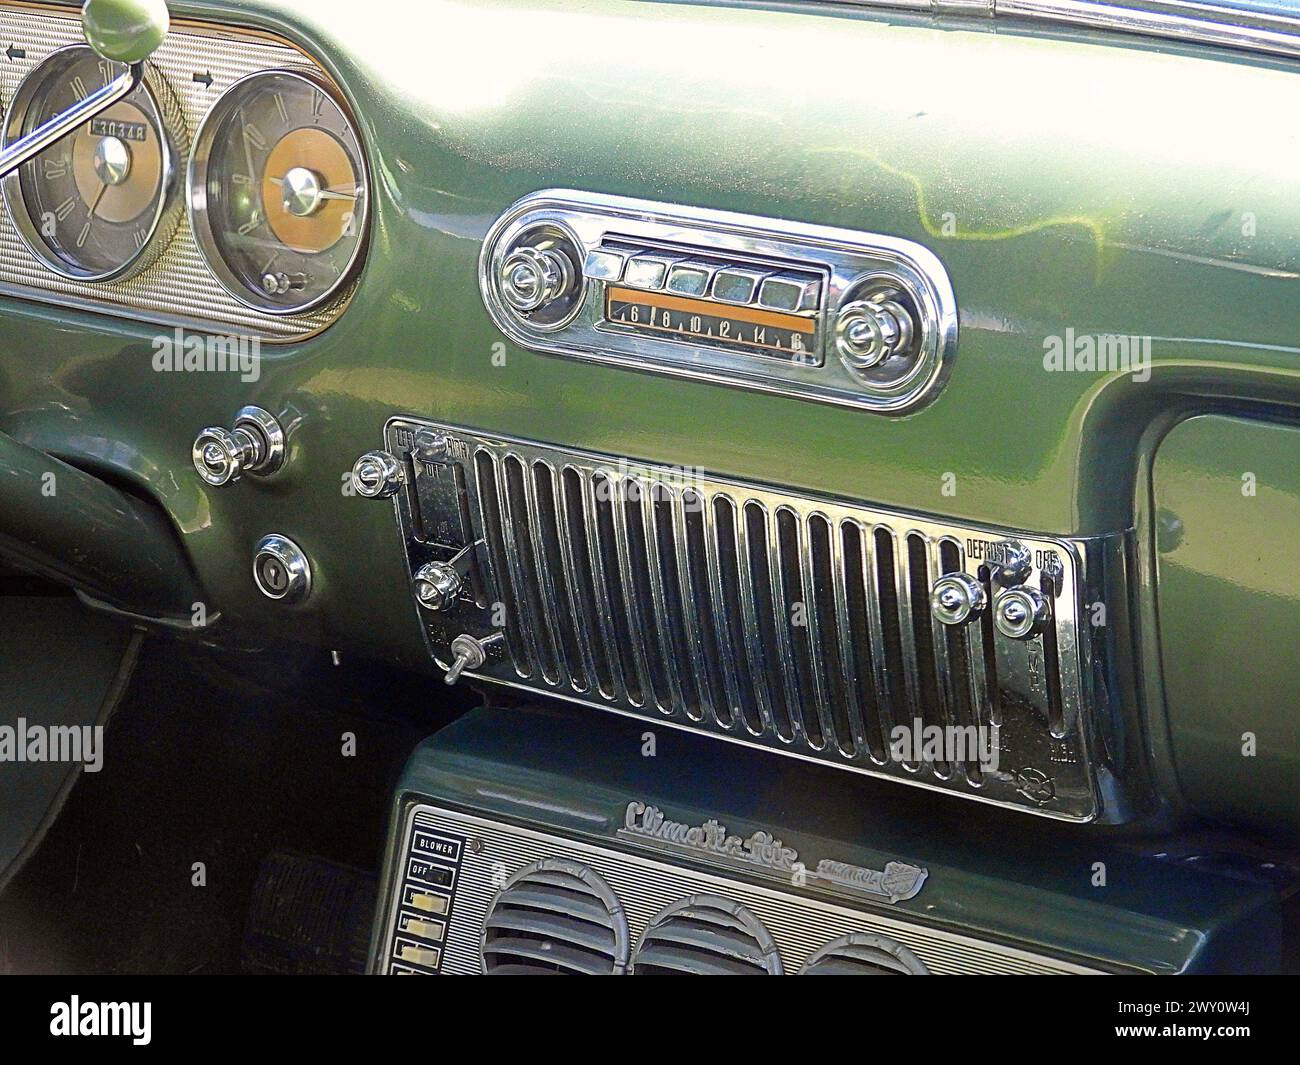 The interior and dashboard of a 1954 Packard Panama Clipper vintage car showing the air vents speedometer and dials Stock Photo